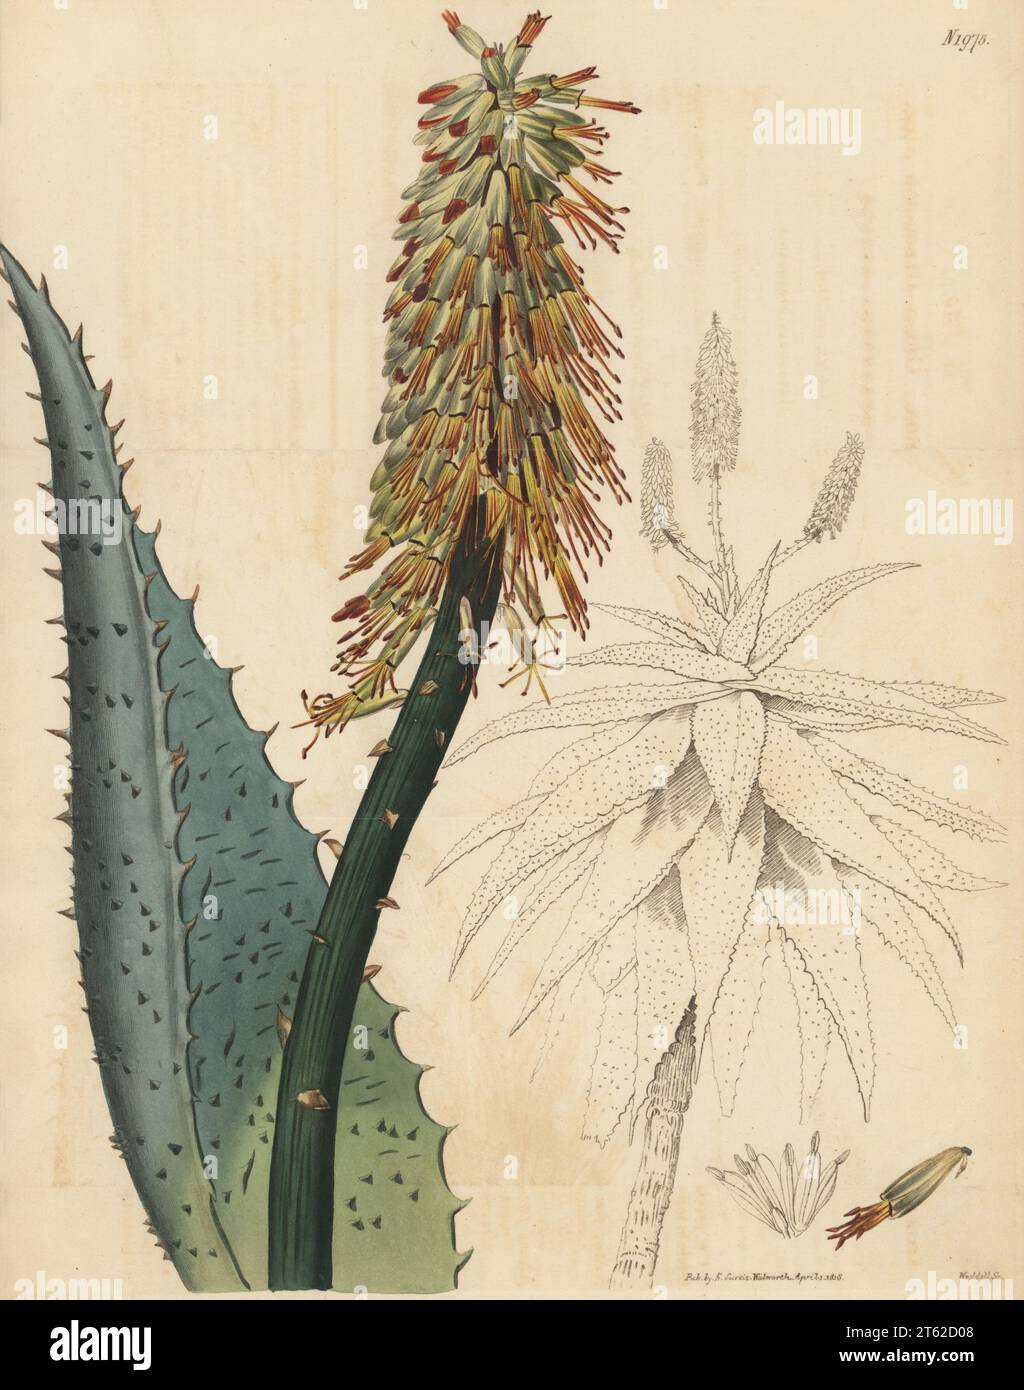 Cape aloe, bitter aloe or great hedge-hog aloe, Aloe ferox. Native of the Cape of Good Hope, South Africa, raised by Philip Miller in 1759. Handcoloured copperplate engraving by Weddell after a botanical illustration by an unknown artist from Curtis’s Botanical Magazine, edited by John Sims, London, 1818. Stock Photo